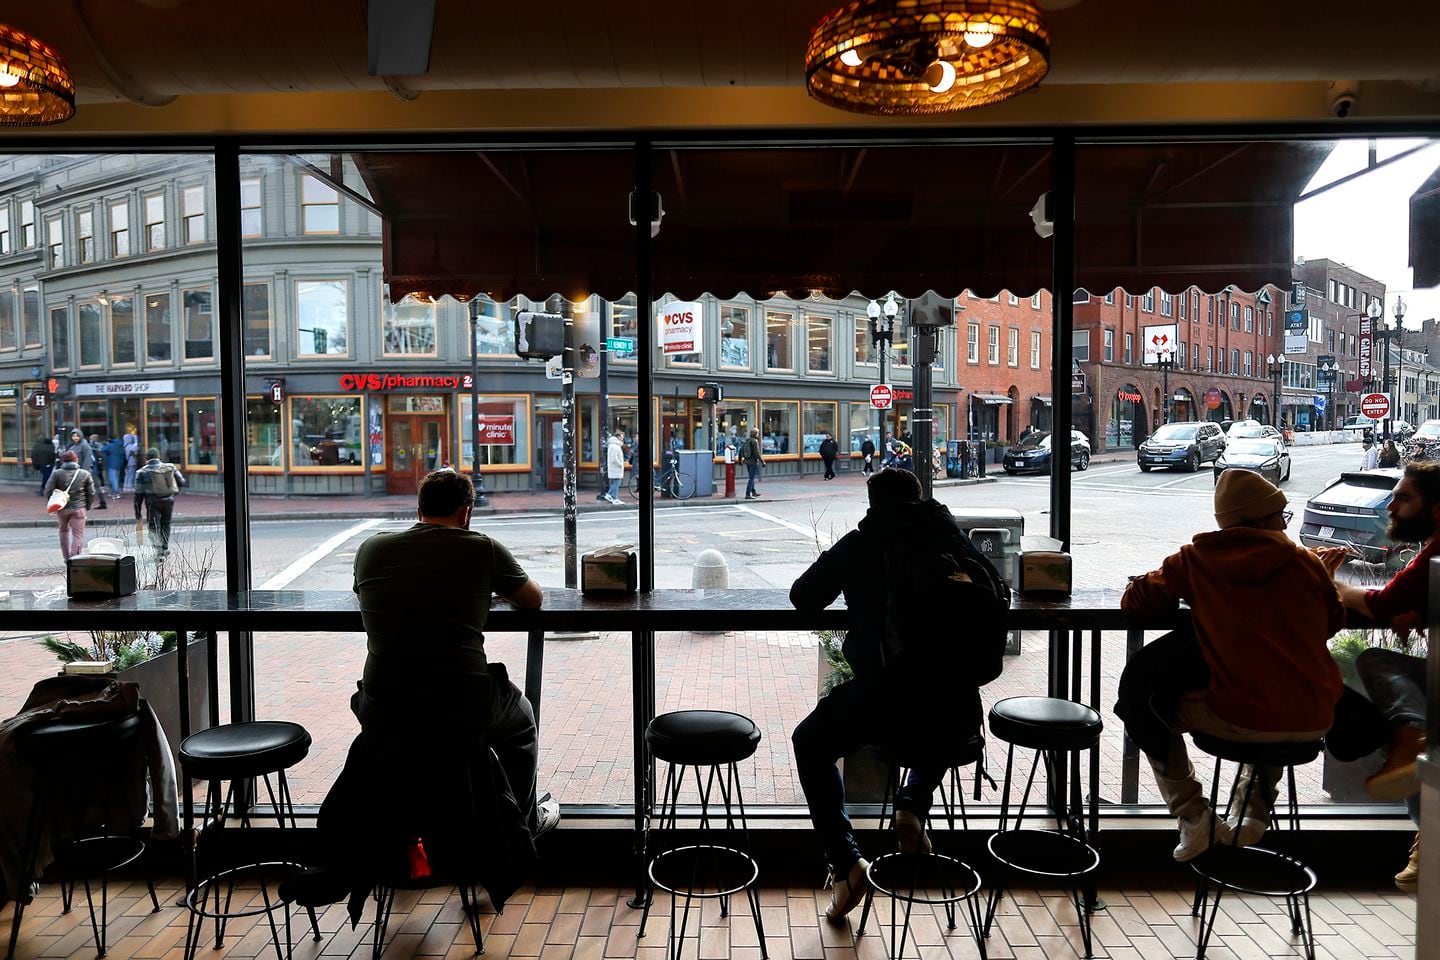 Customers look out onto Havard Square from their perch inside Joe’s Pizza.